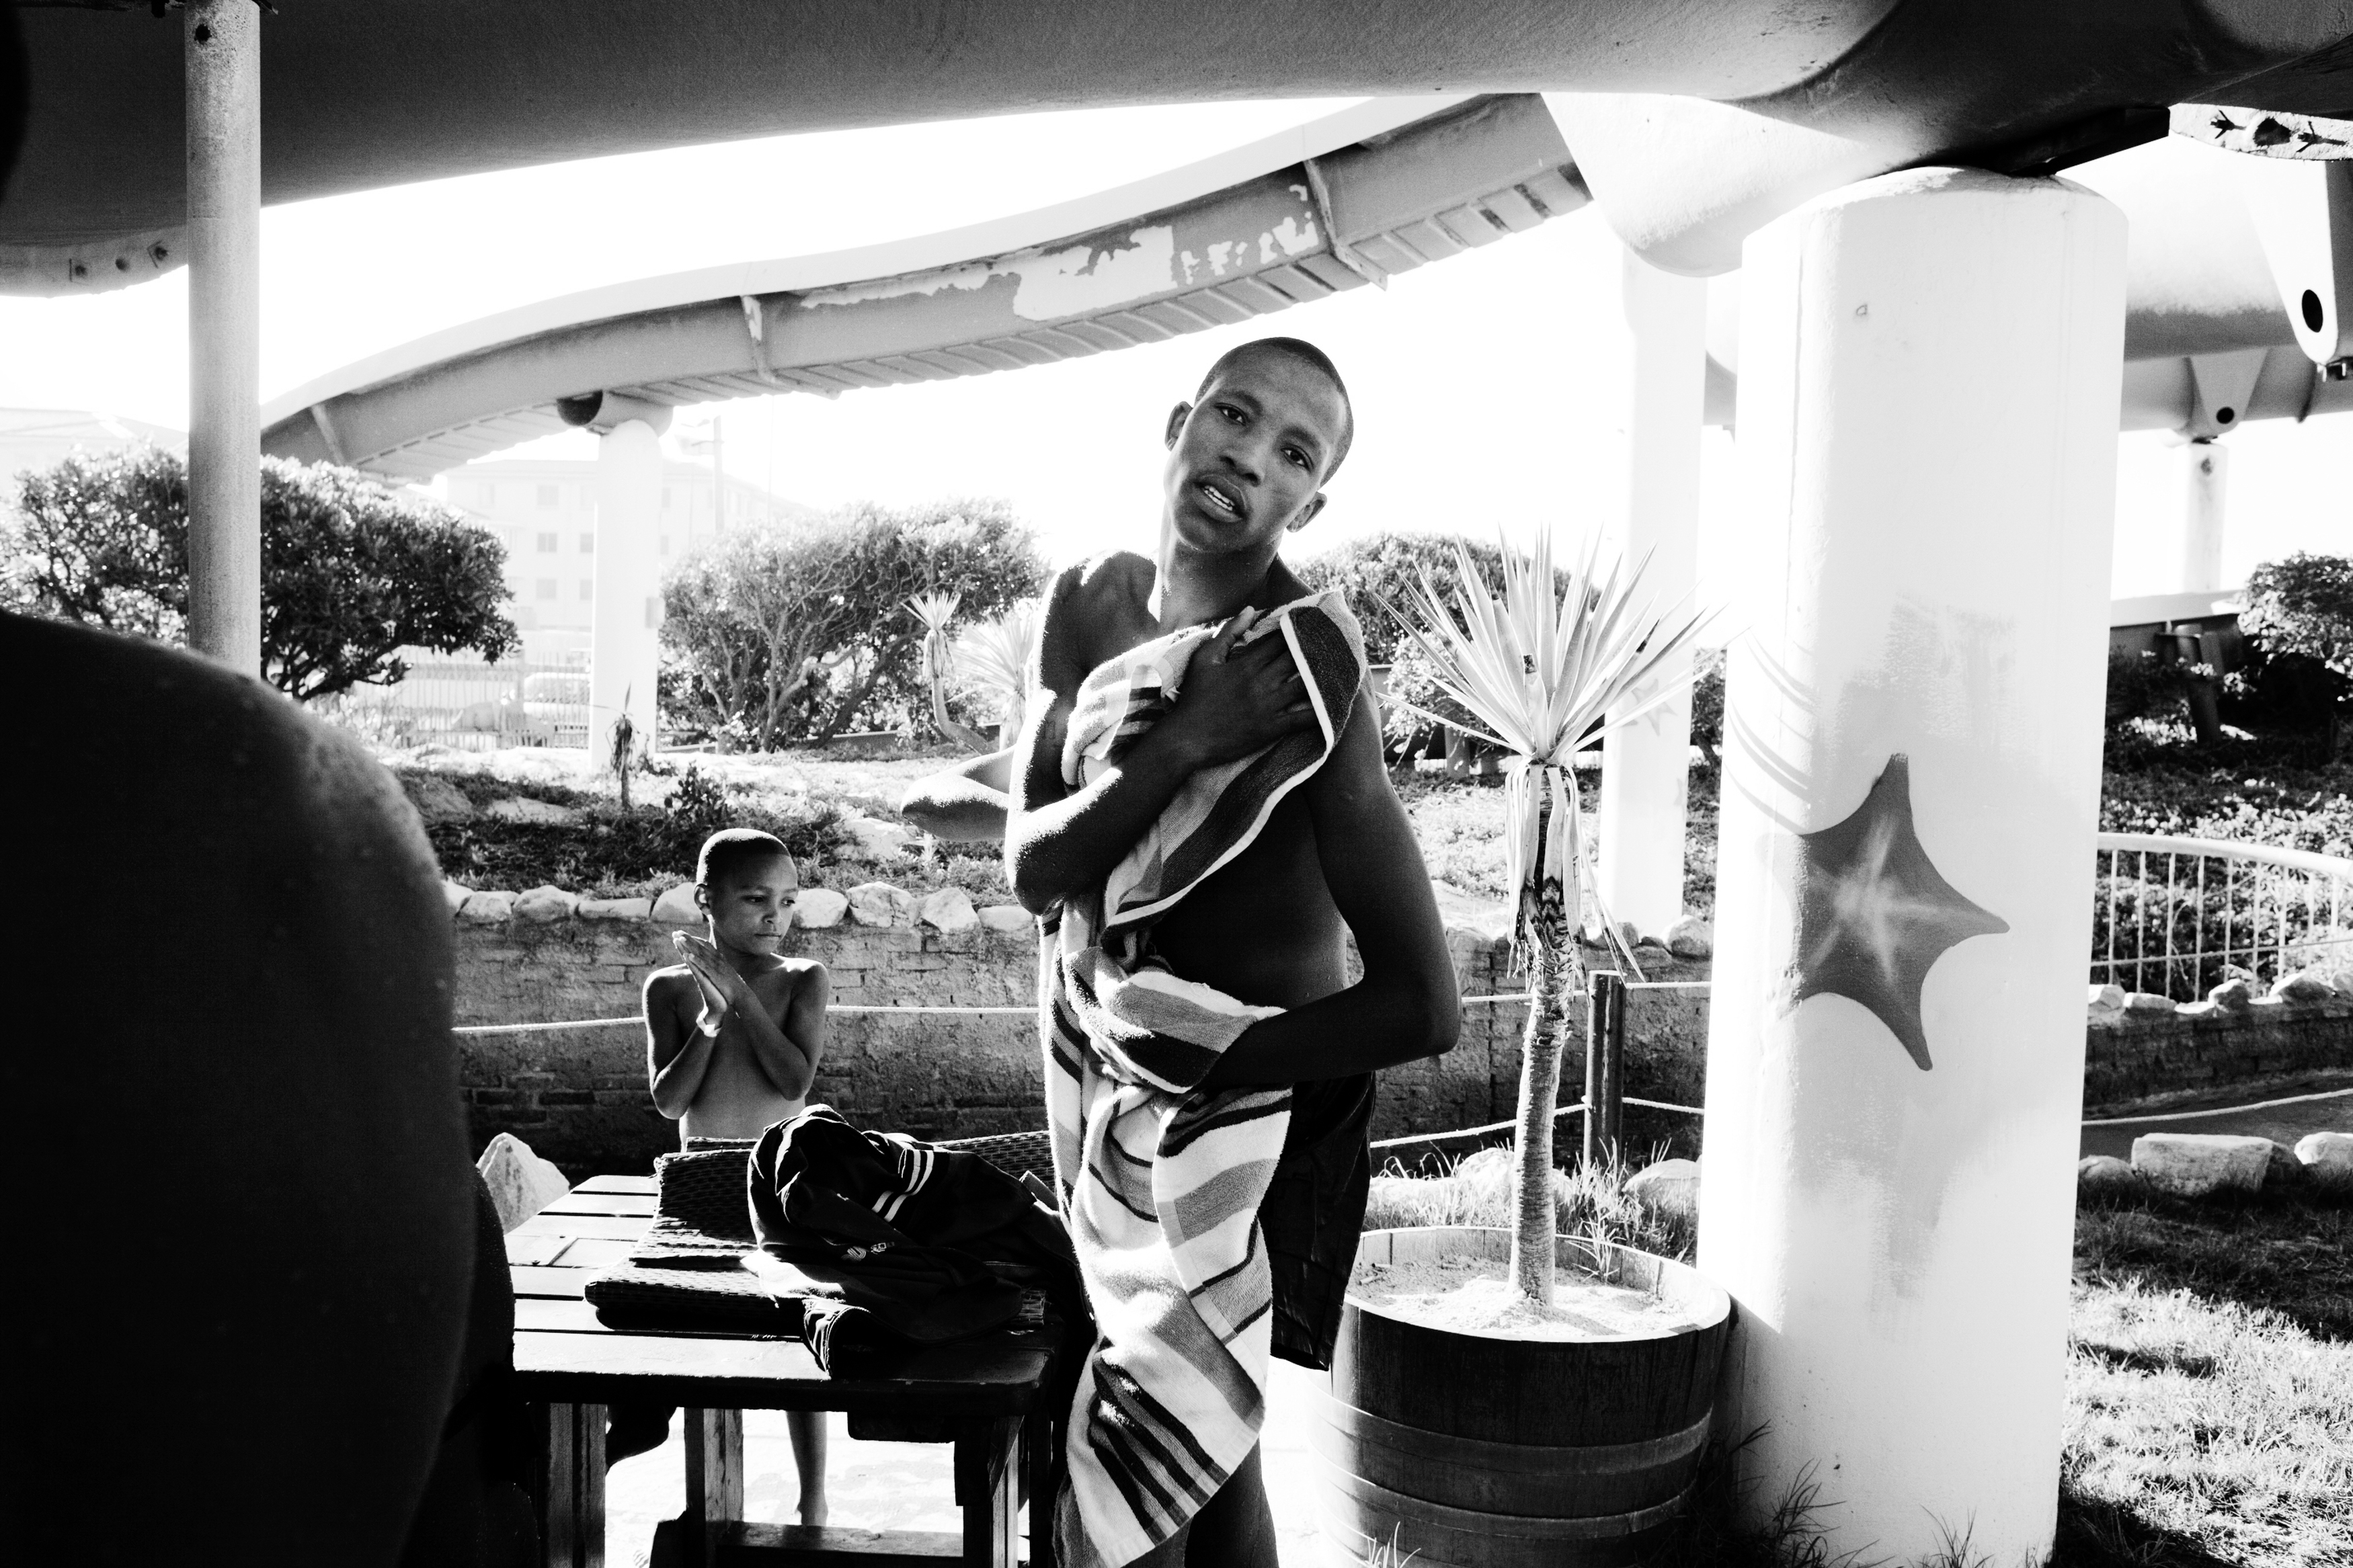 Nkosinathi Dodi, 18, from Khayelitsha, at the Muizenberg water park during a field trip with the Beth Uriel home for disadvantaged young men, in Cape Town. His stay at the home was brief. “He lives in an old abandoned building now, but I see him at church,” says the program director Lindsay Henley. “From the looks of it, he struggles with drugs.” “As much as we tried to help him and as much as he needed help, he’s got no other family, he still got sucked in by the pressures of drugs and gangsterism,” says Melvin Koopman, another a director at Beth Uriel.